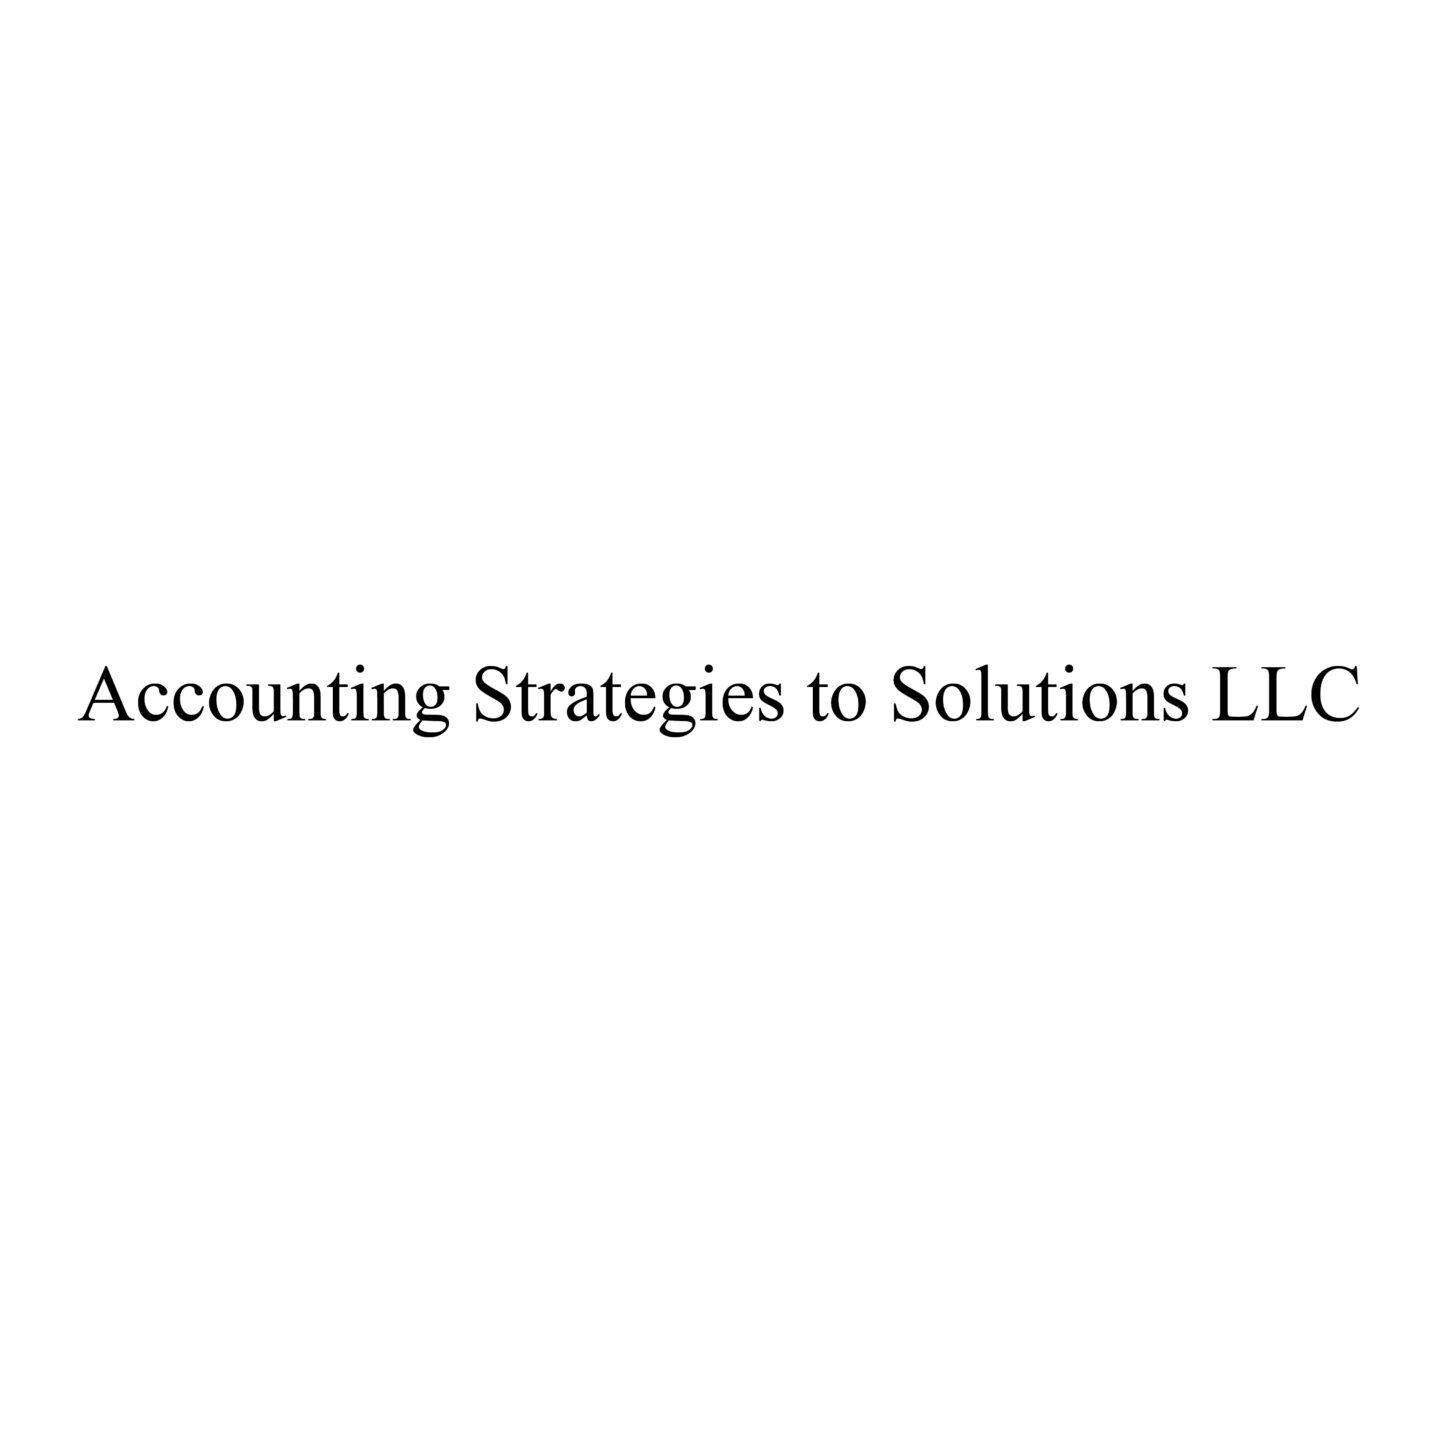 Accounting Strategies to Solutions-01-01